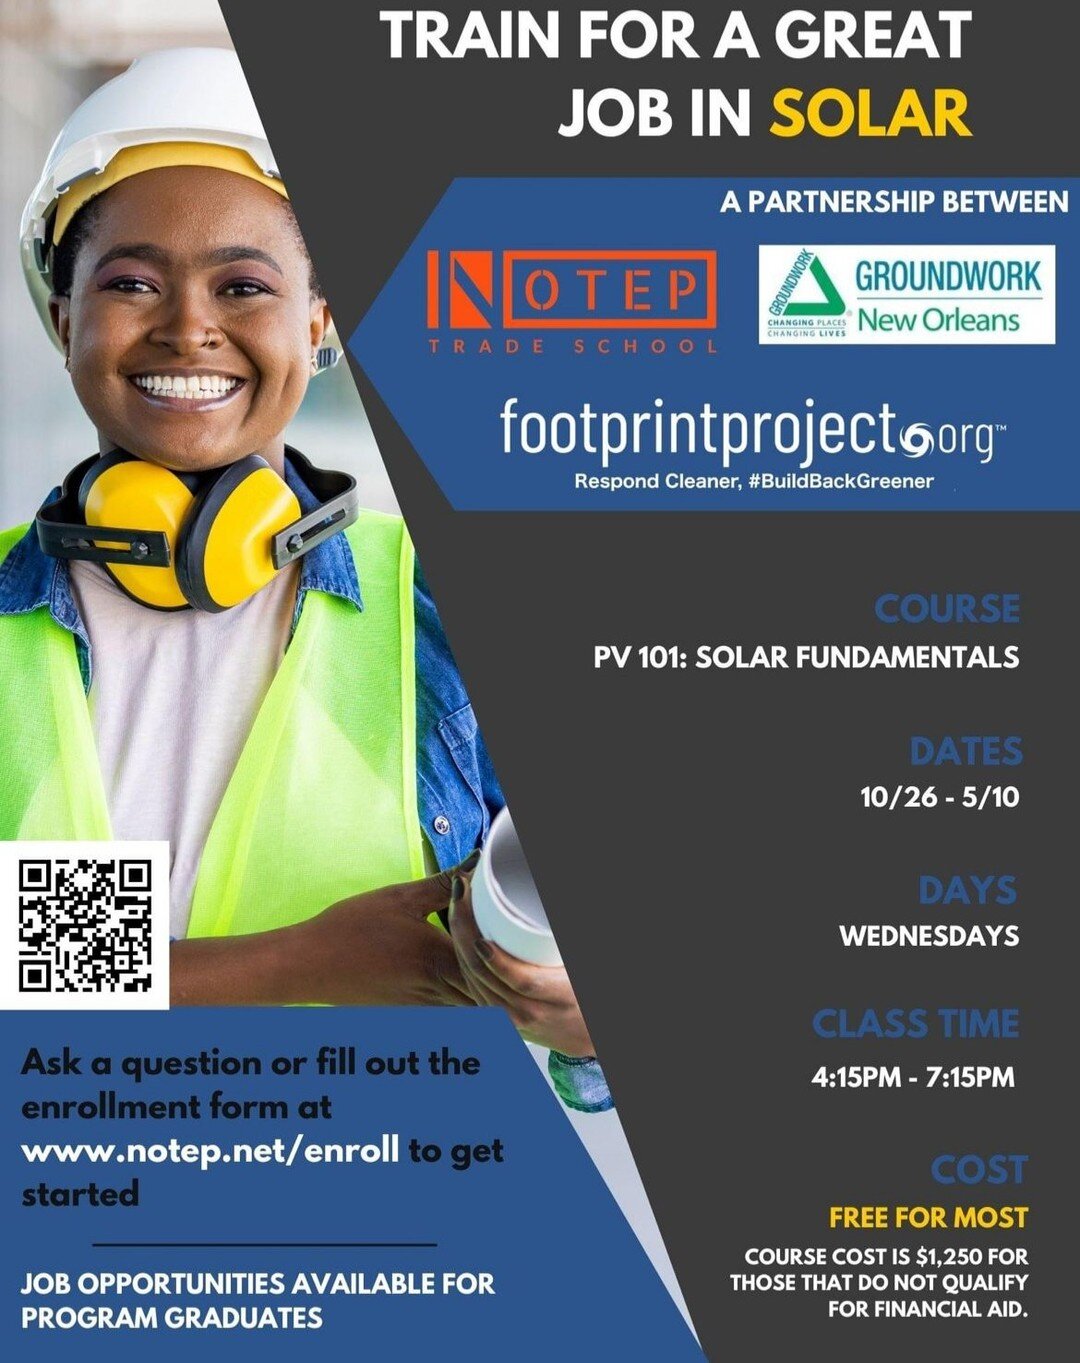 Hey #NOLA friends! Our partners at @notepnola and @groundworknola still have a few open slots for our first ever PV 101: Solar Training! Go to notep.net/enroll for more info